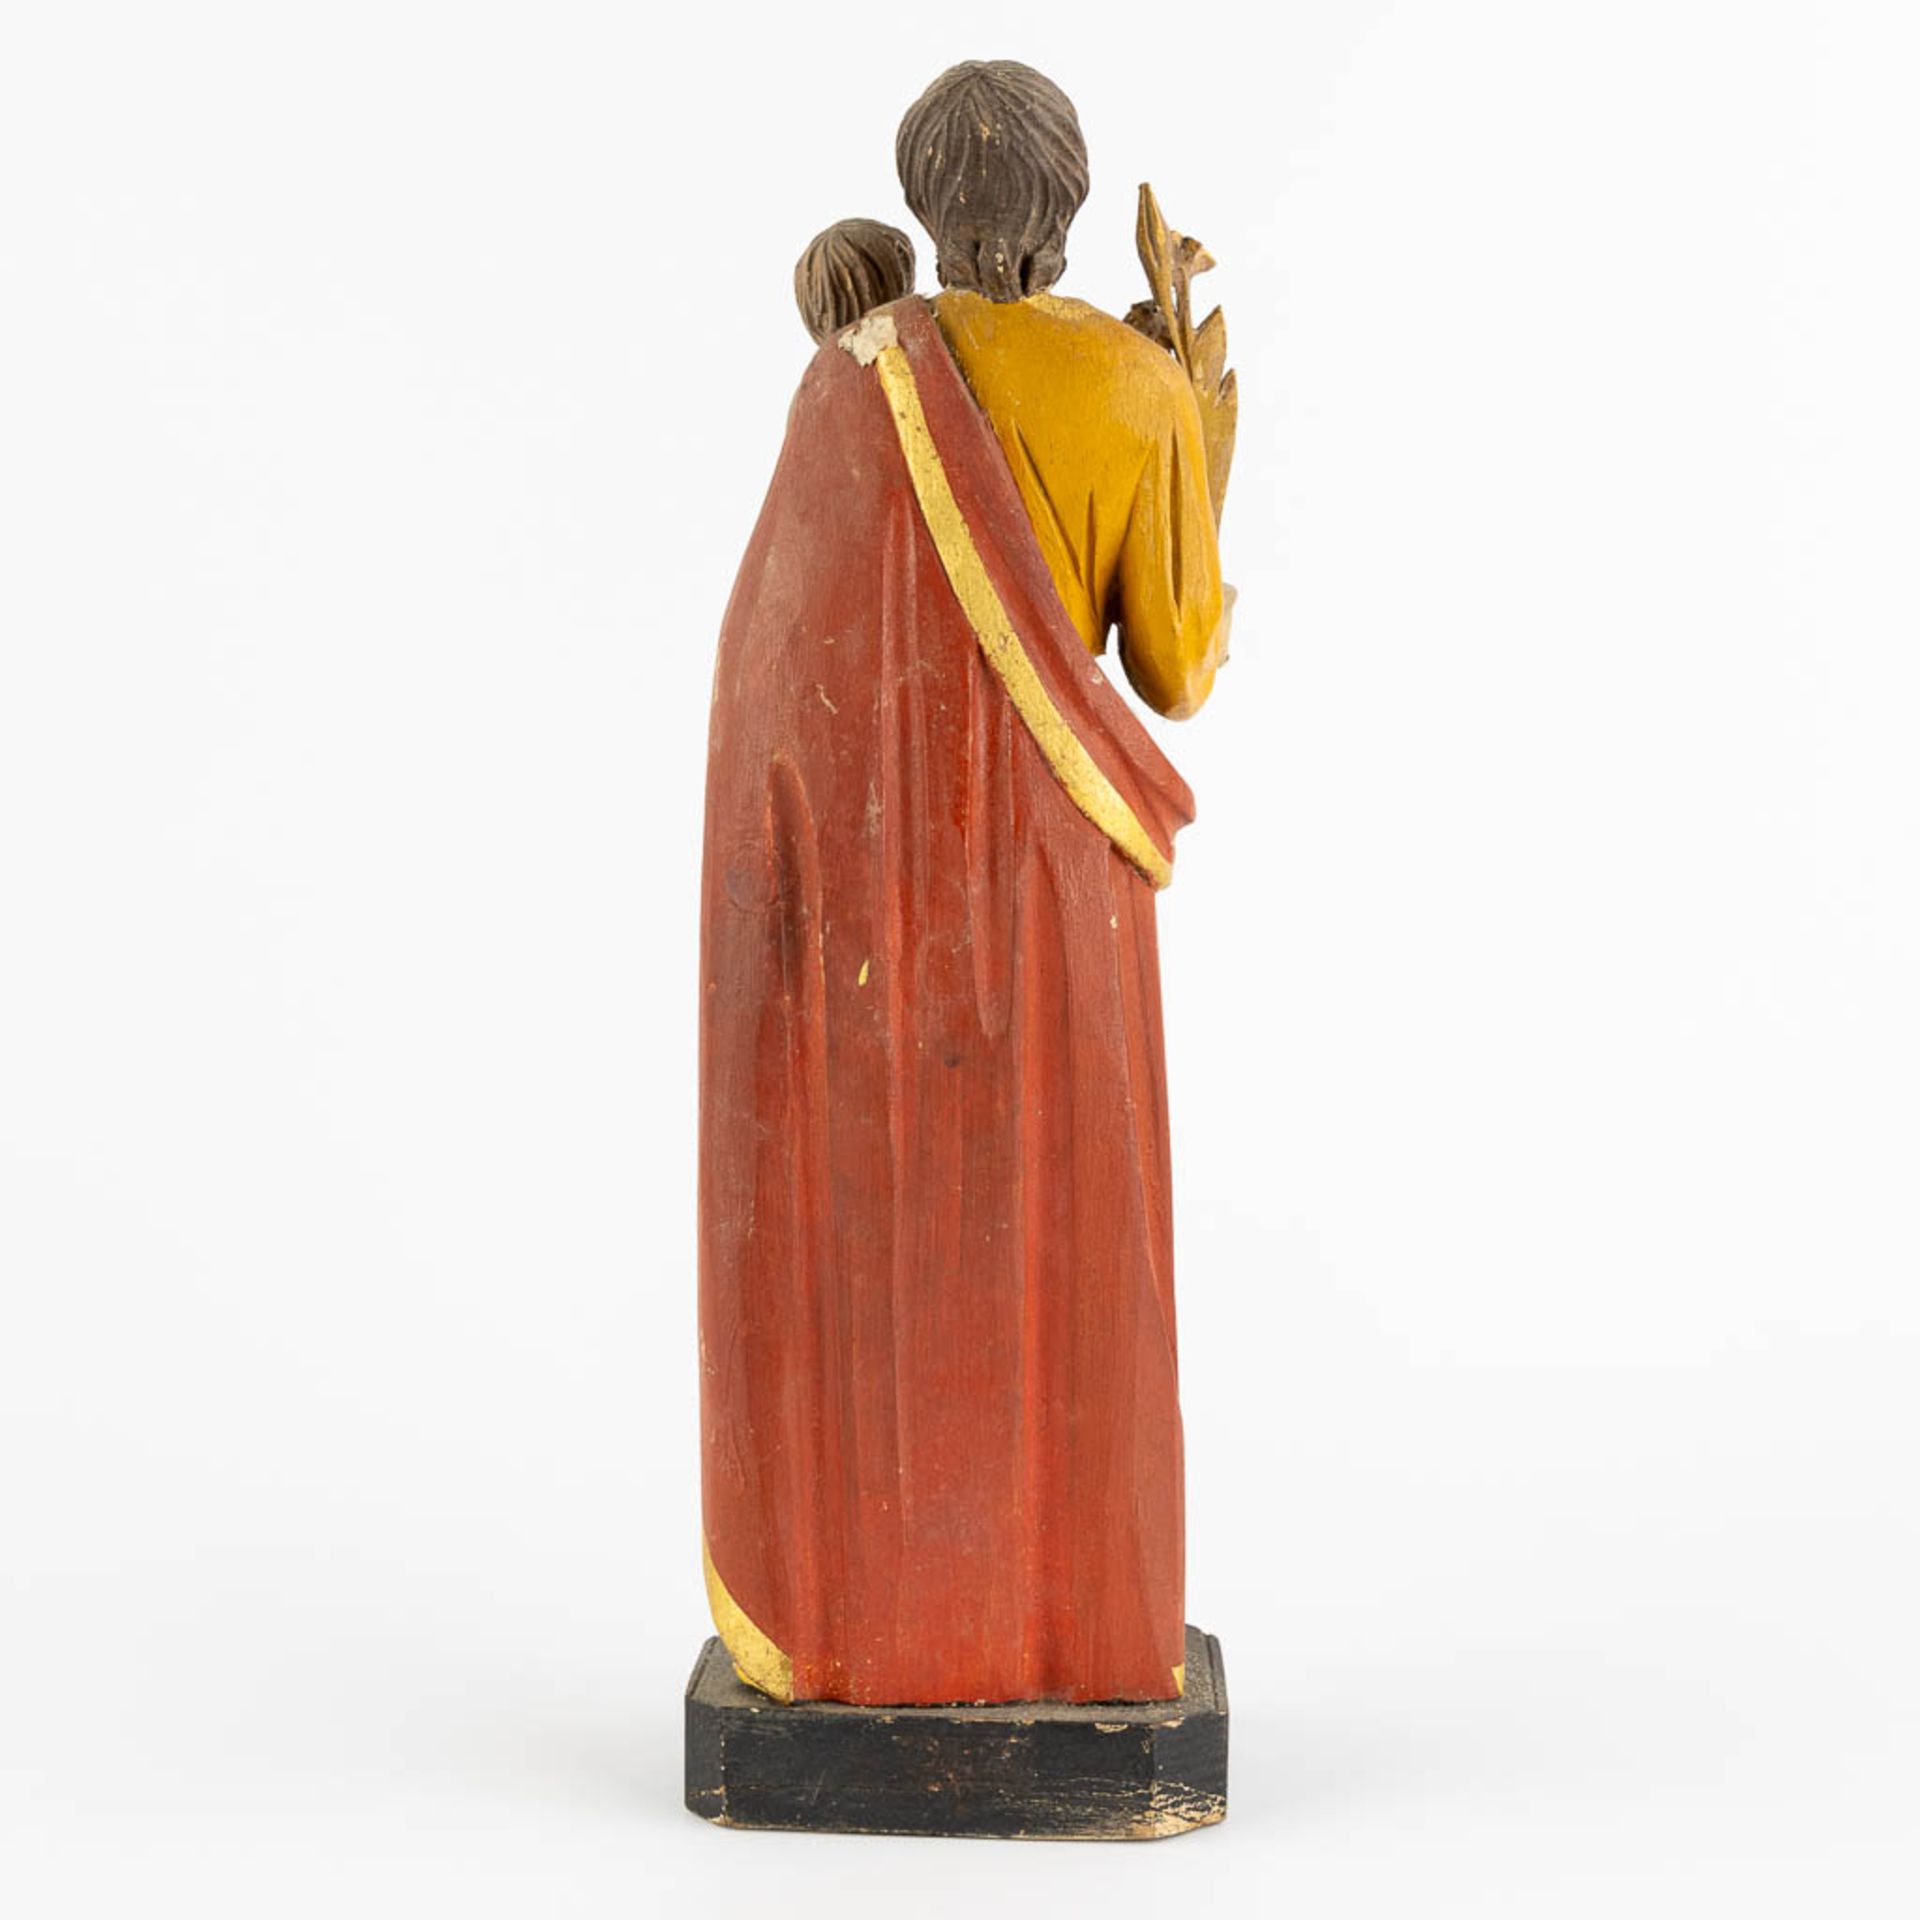 A collection of wood sculptured Corpus Christi and Saints. 19th and 20th C. (W:38 x H:53 cm) - Image 8 of 19